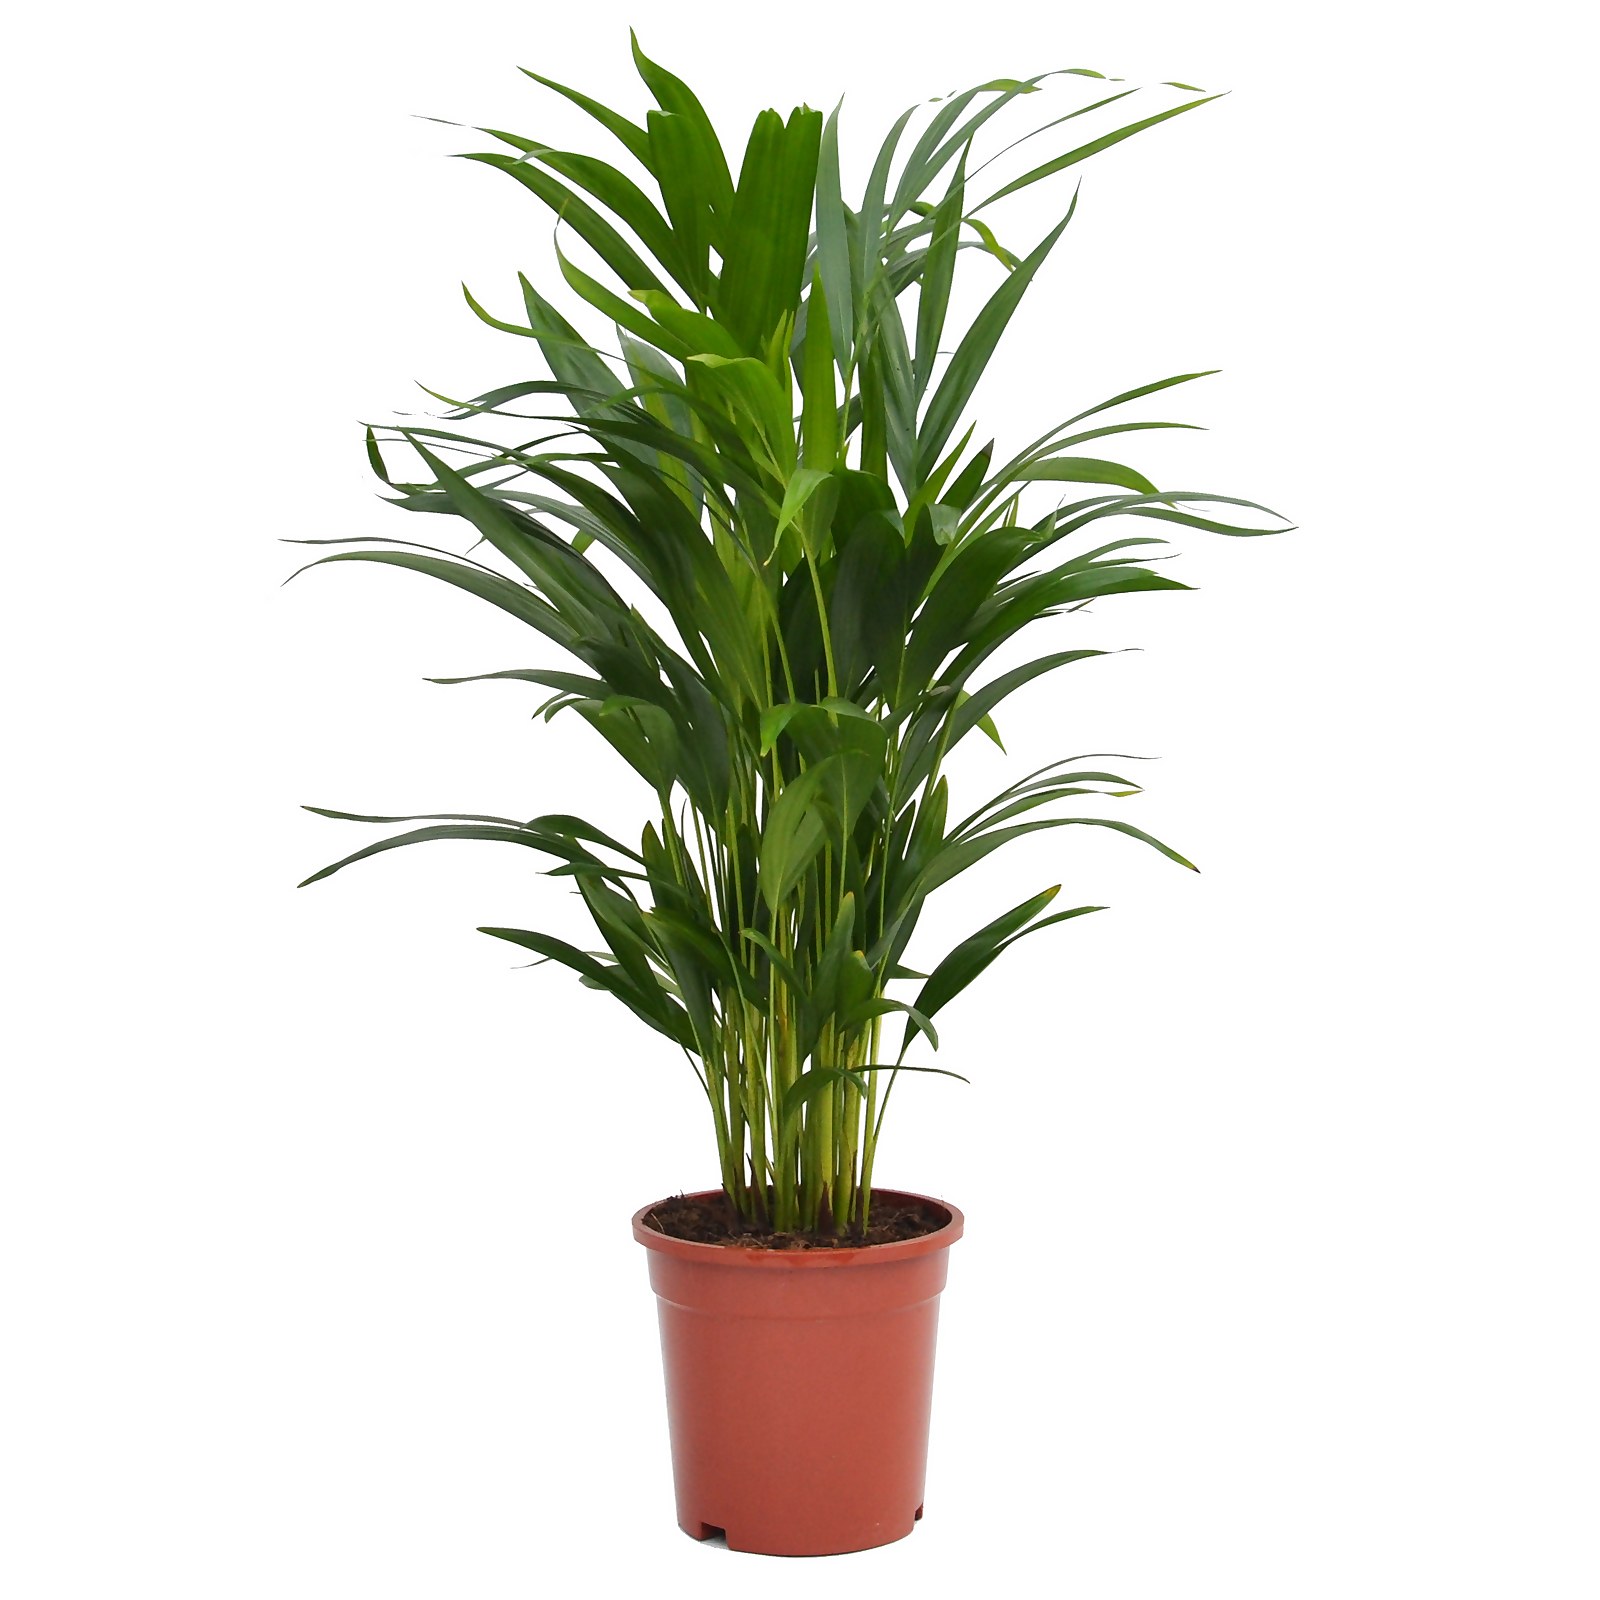 Photo of Areca Palm Dypsis Lutescens -butterfly Or Golden Palm- In 17cm Pot